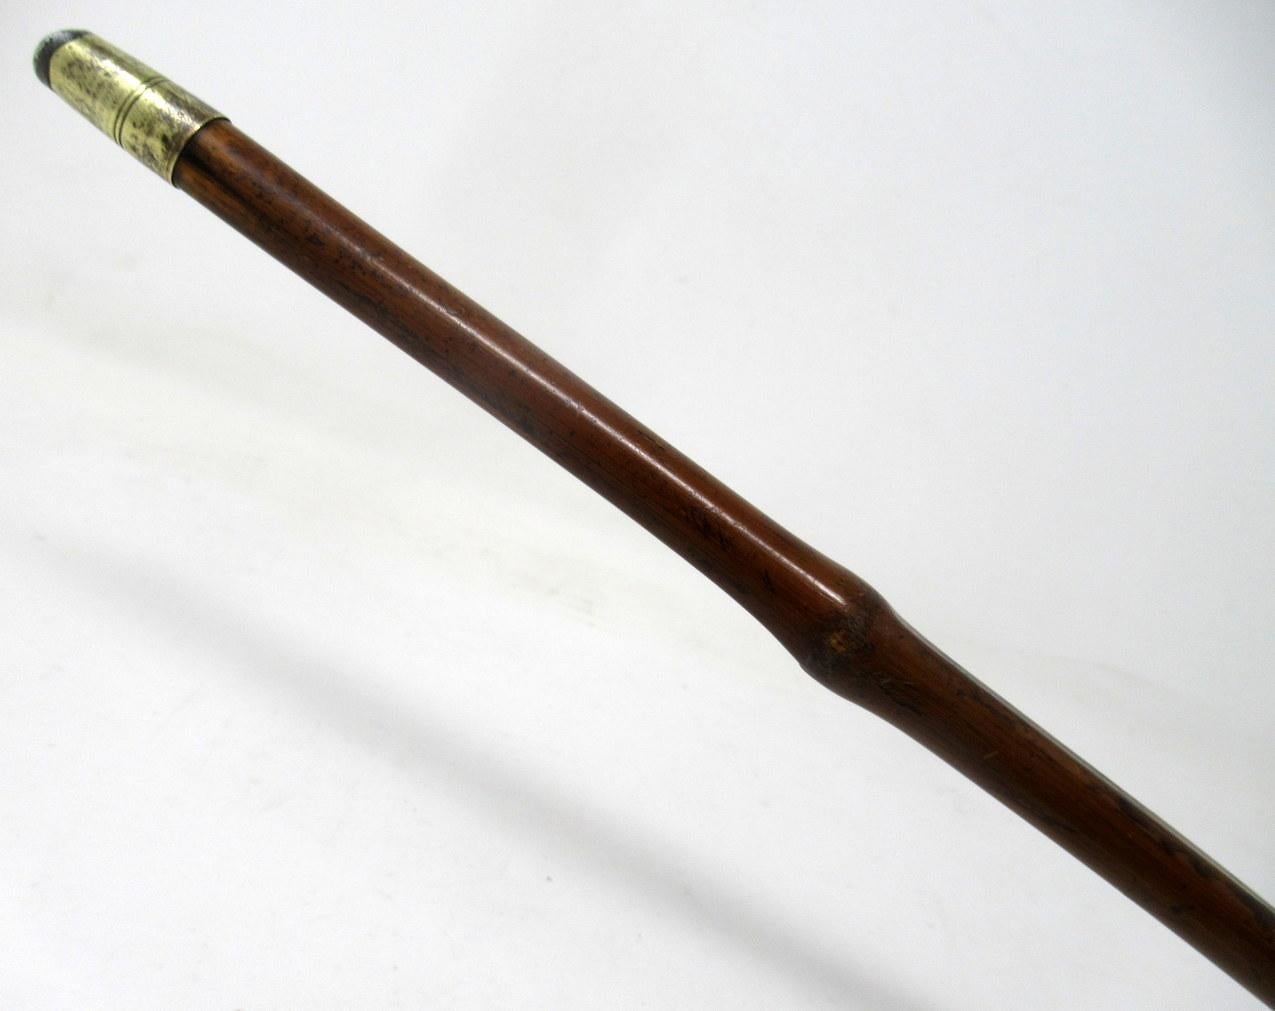 Antique Bamboo Wooden Walking Stick Cane Sterling Silver Mount Crook Handle 1908 2